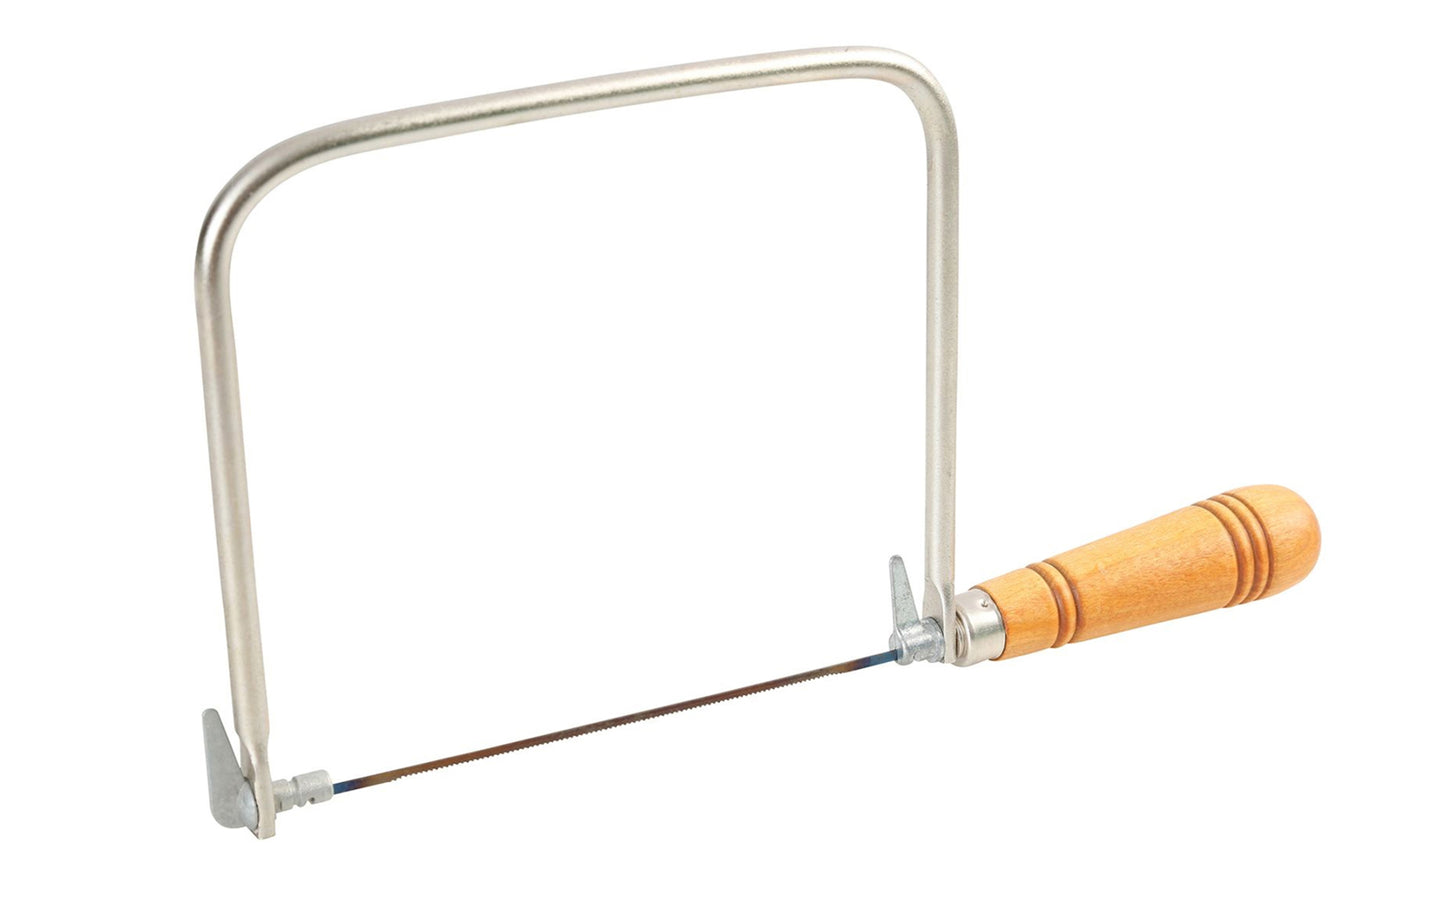 This 6" Coping Saw with Hardwood Handle is excellent for cutting a variety of patterns in wood trim & paneling. It features a steel frame for strength & durability, & it's 360° adjustable blade is ideal for cutting intricate shapes & interior cut-outs in woodworking or carpentry. GreatNeck Model No. 28. Made in USA.